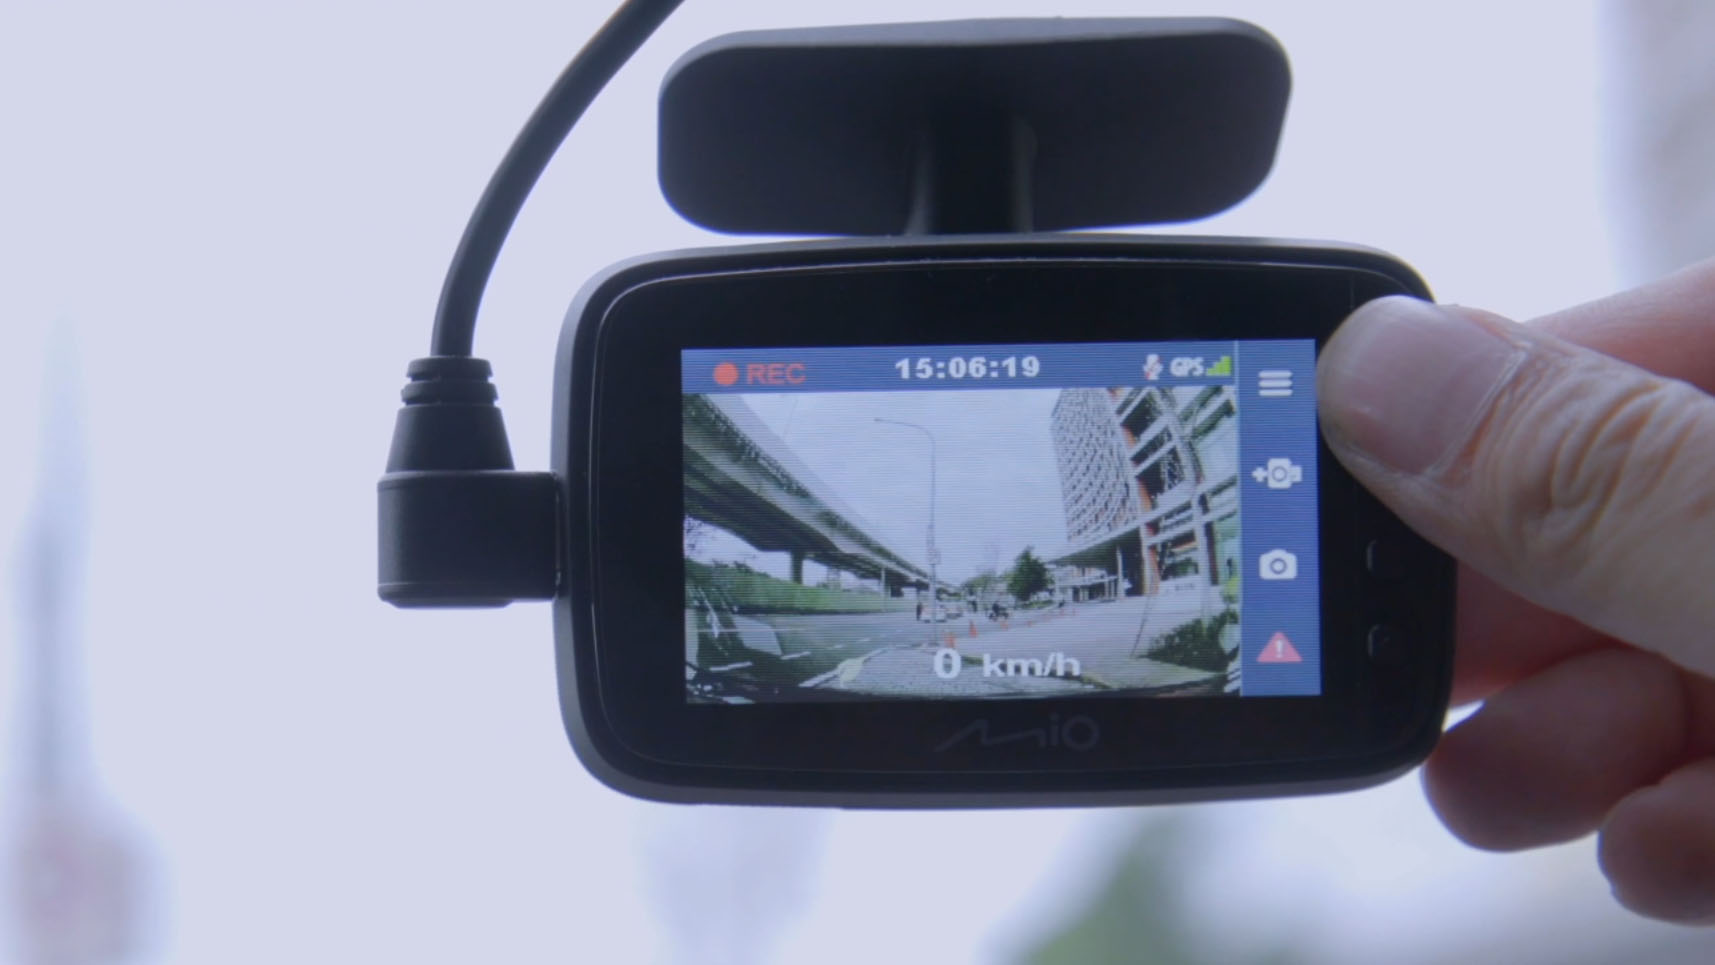 A hand holding the Mio Mivue 818 dash cam on a windshield